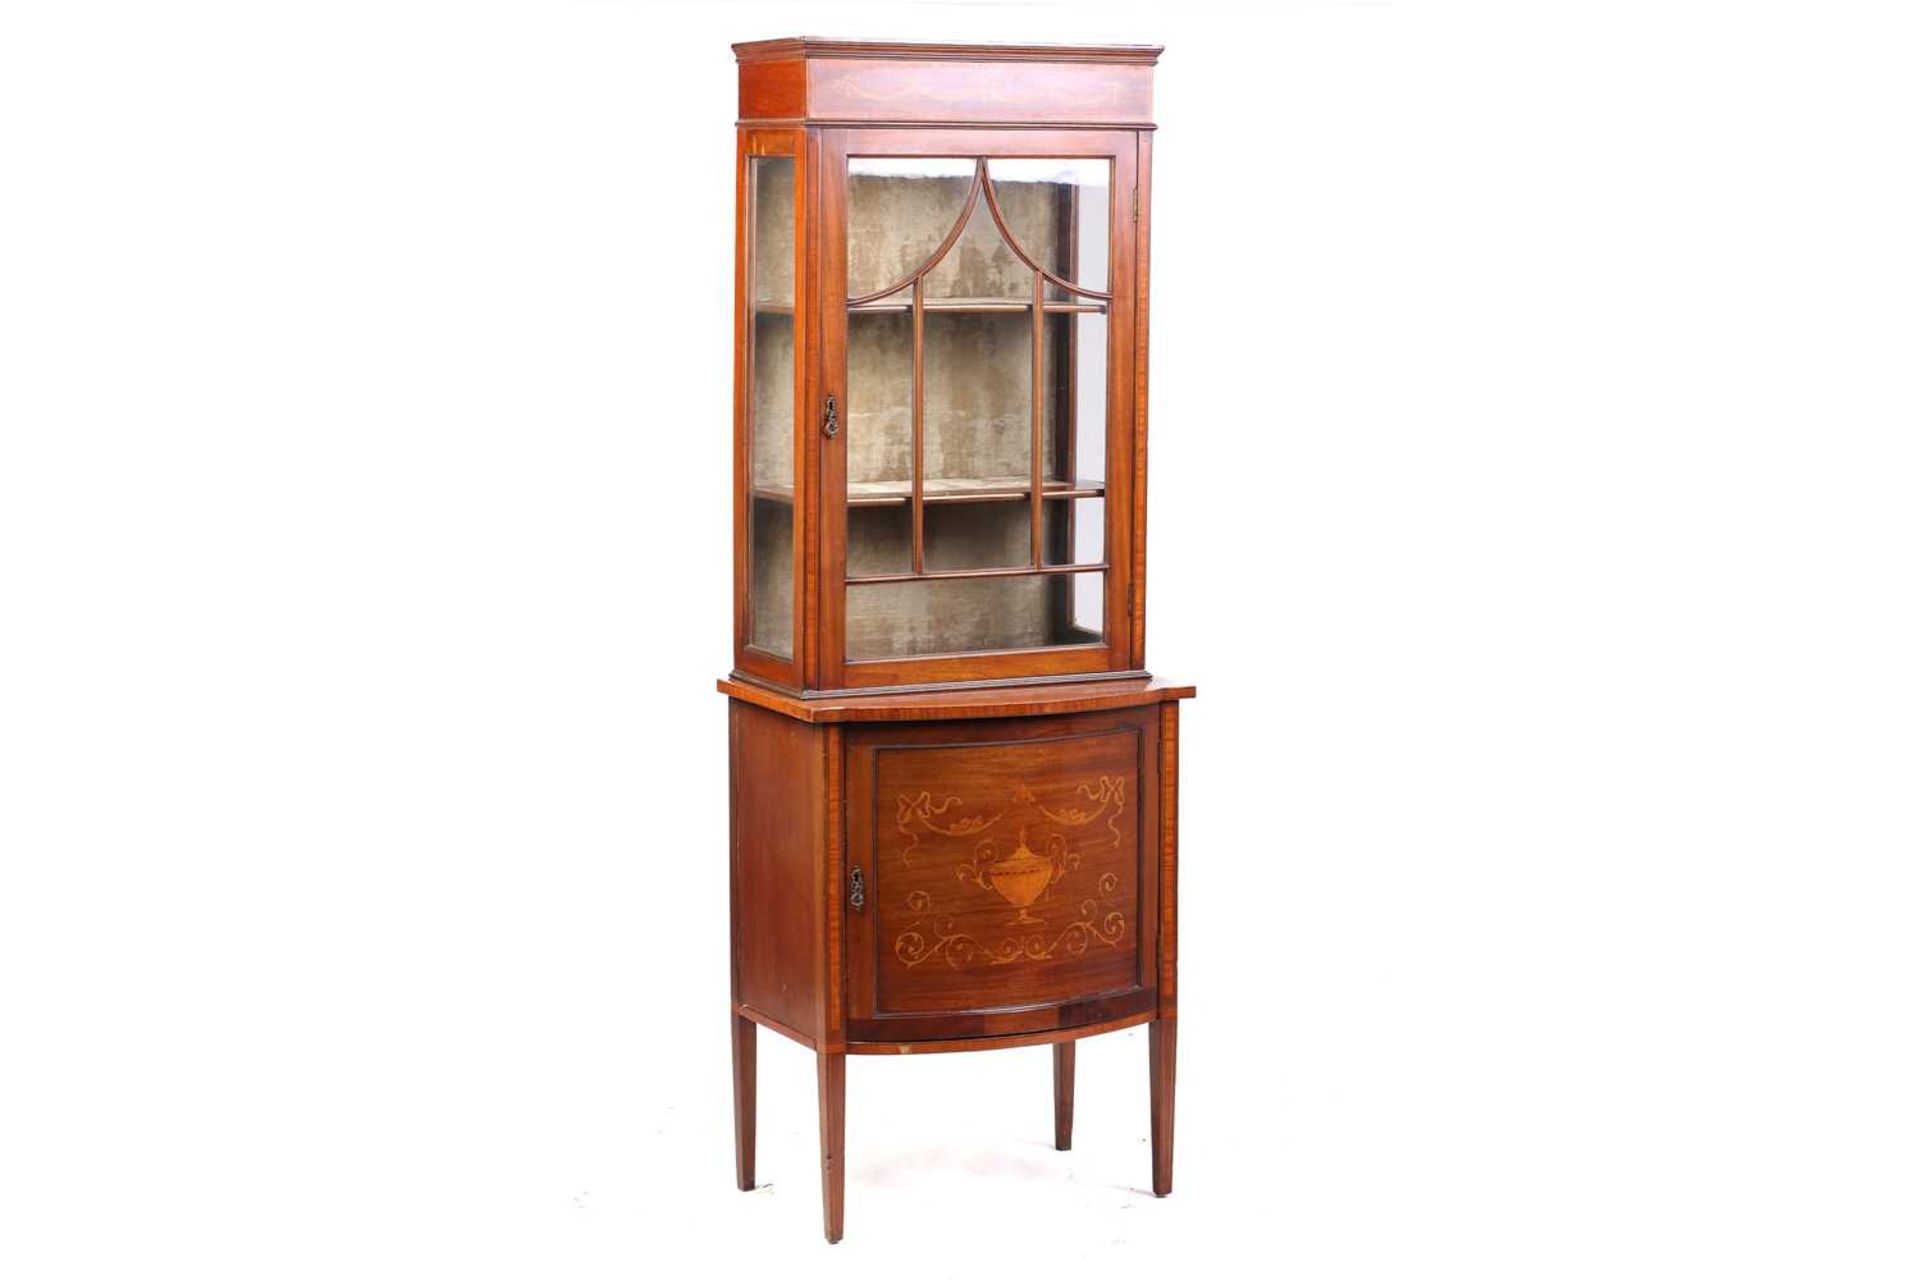 An Edwardian mahogany glazed display cabinet, with 'pagoda arched' astragal glazing, above a bow- - Image 7 of 7